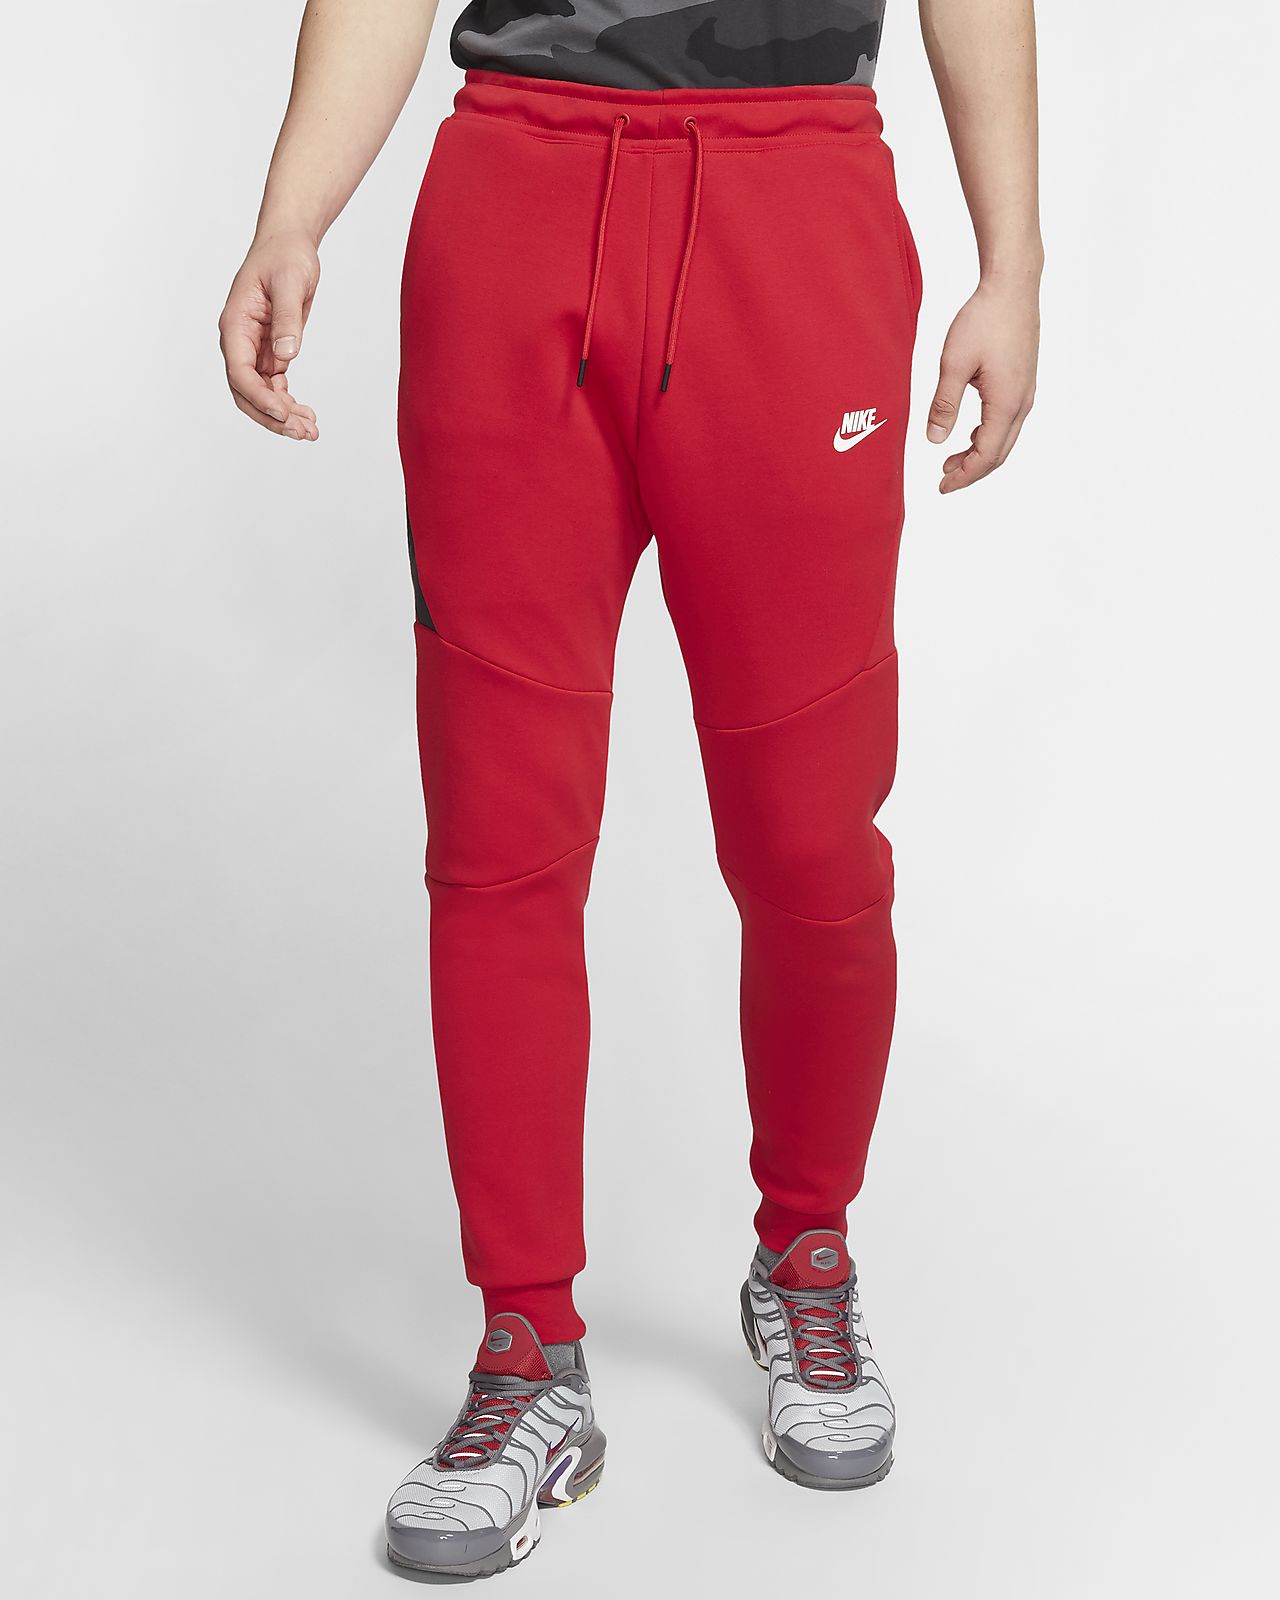 grey and red nike joggers